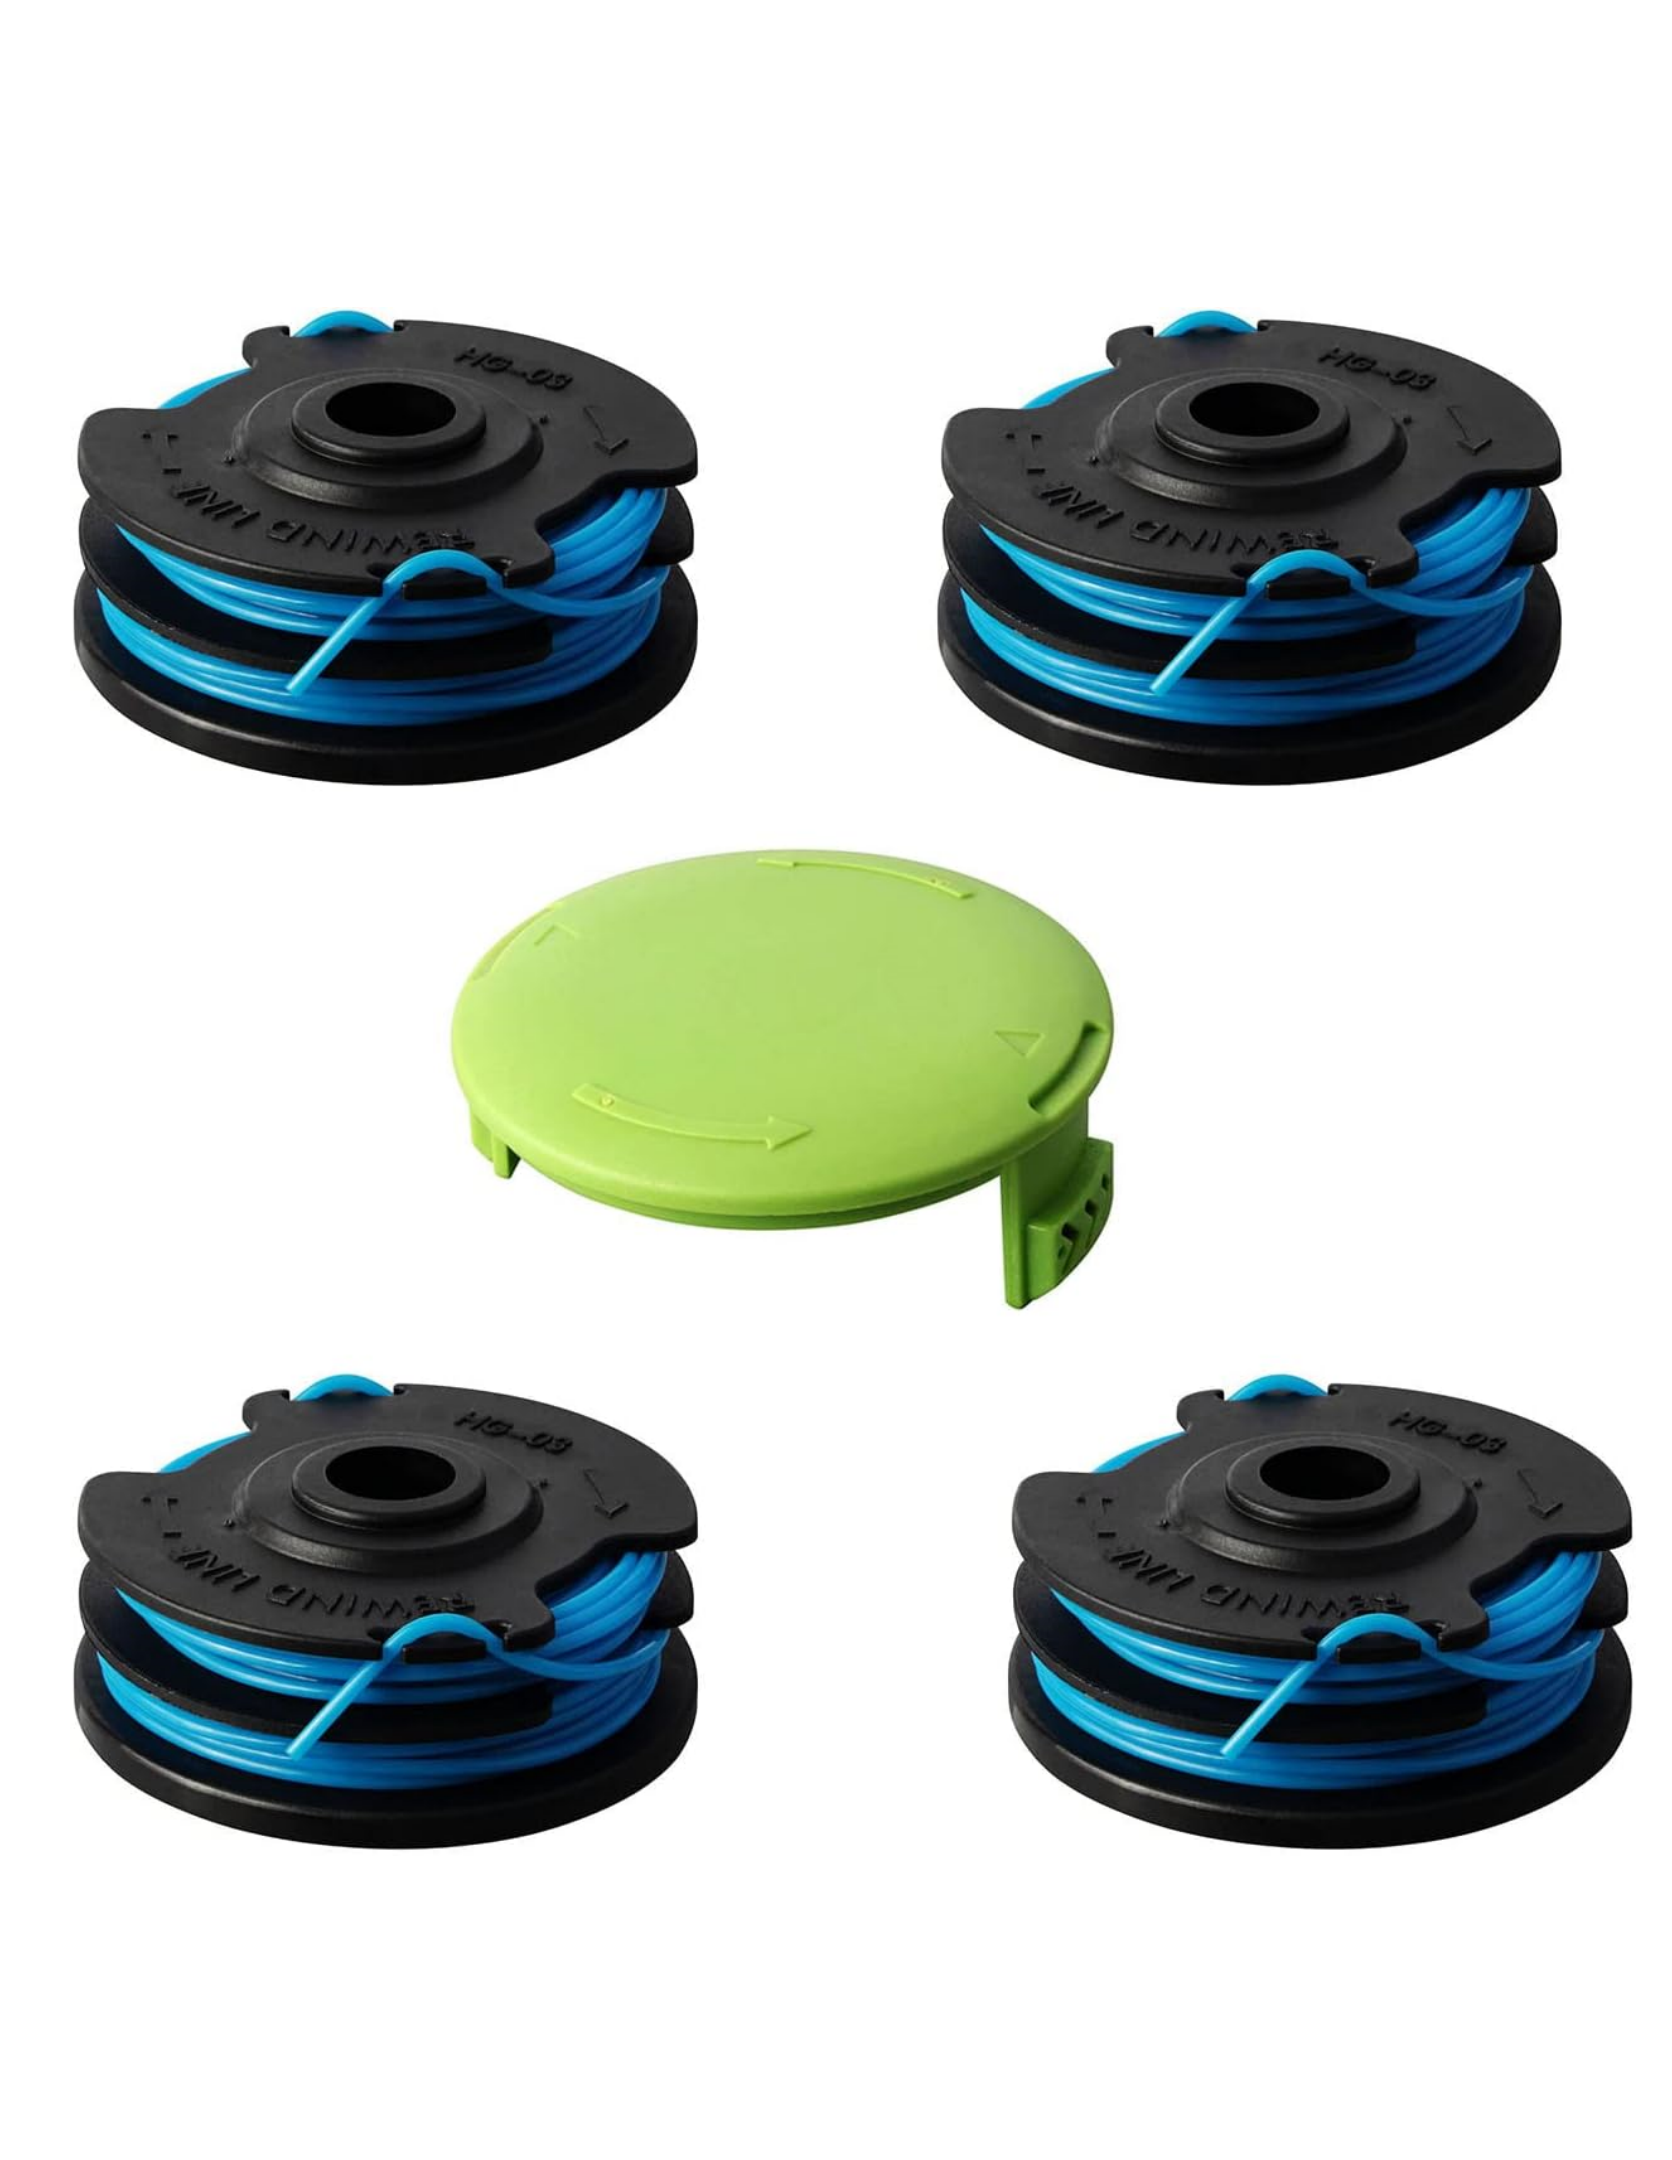 THTEN 71-99006 Weed Eater Spools Compatible with Craftsman 71-30378 71-30383 71-98981 71-98982 CMCST900D1 Type 1, CMESTE920 Cordless String Trimmer 0.065 inch Dual Line Auto Feed Replacement Spool